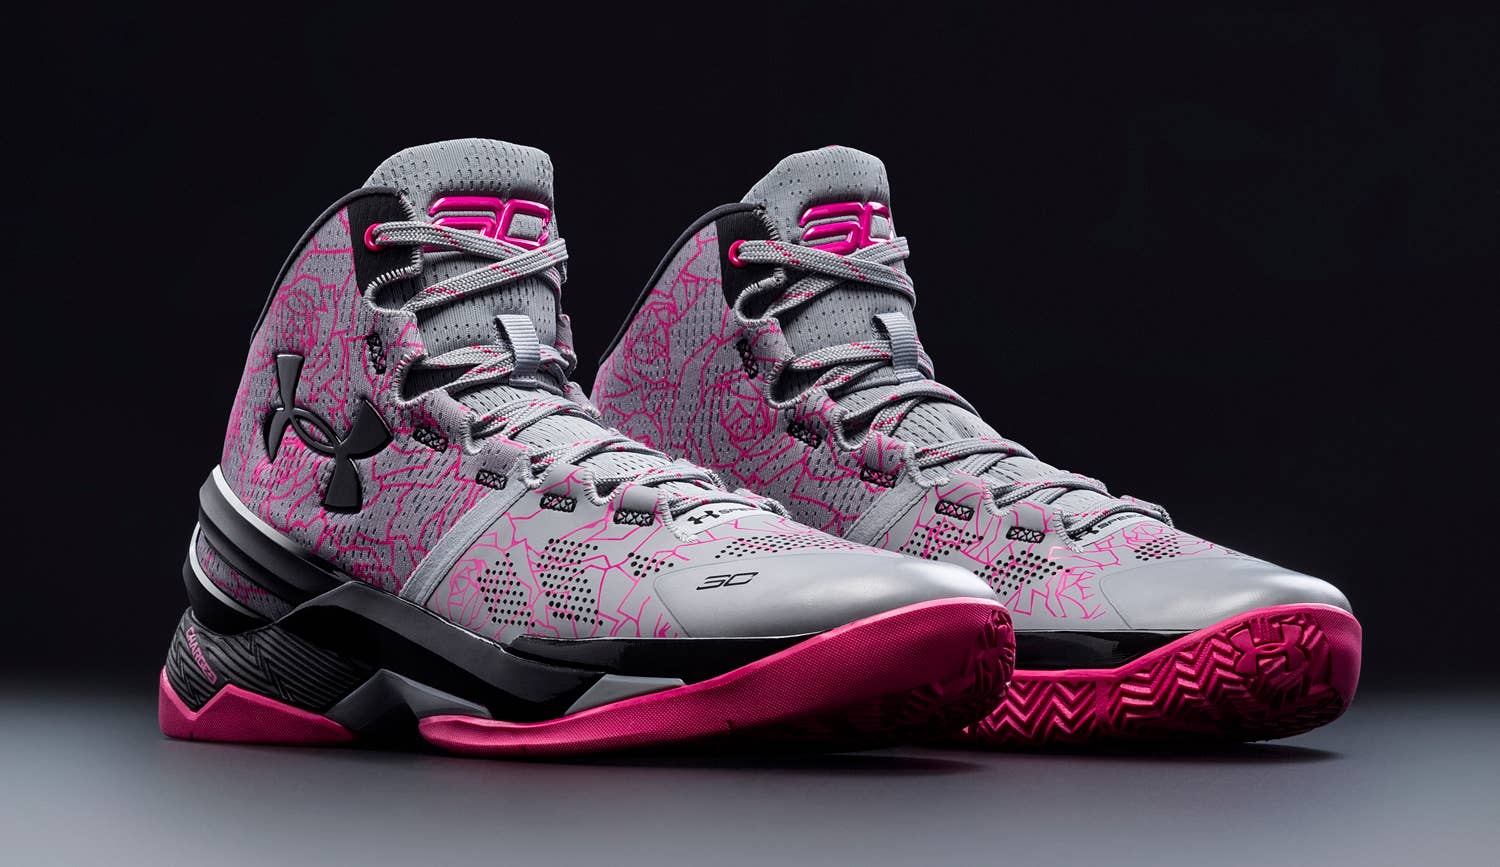 Steph Curry Loves His Mom So Much That He Made Sneakers For Her